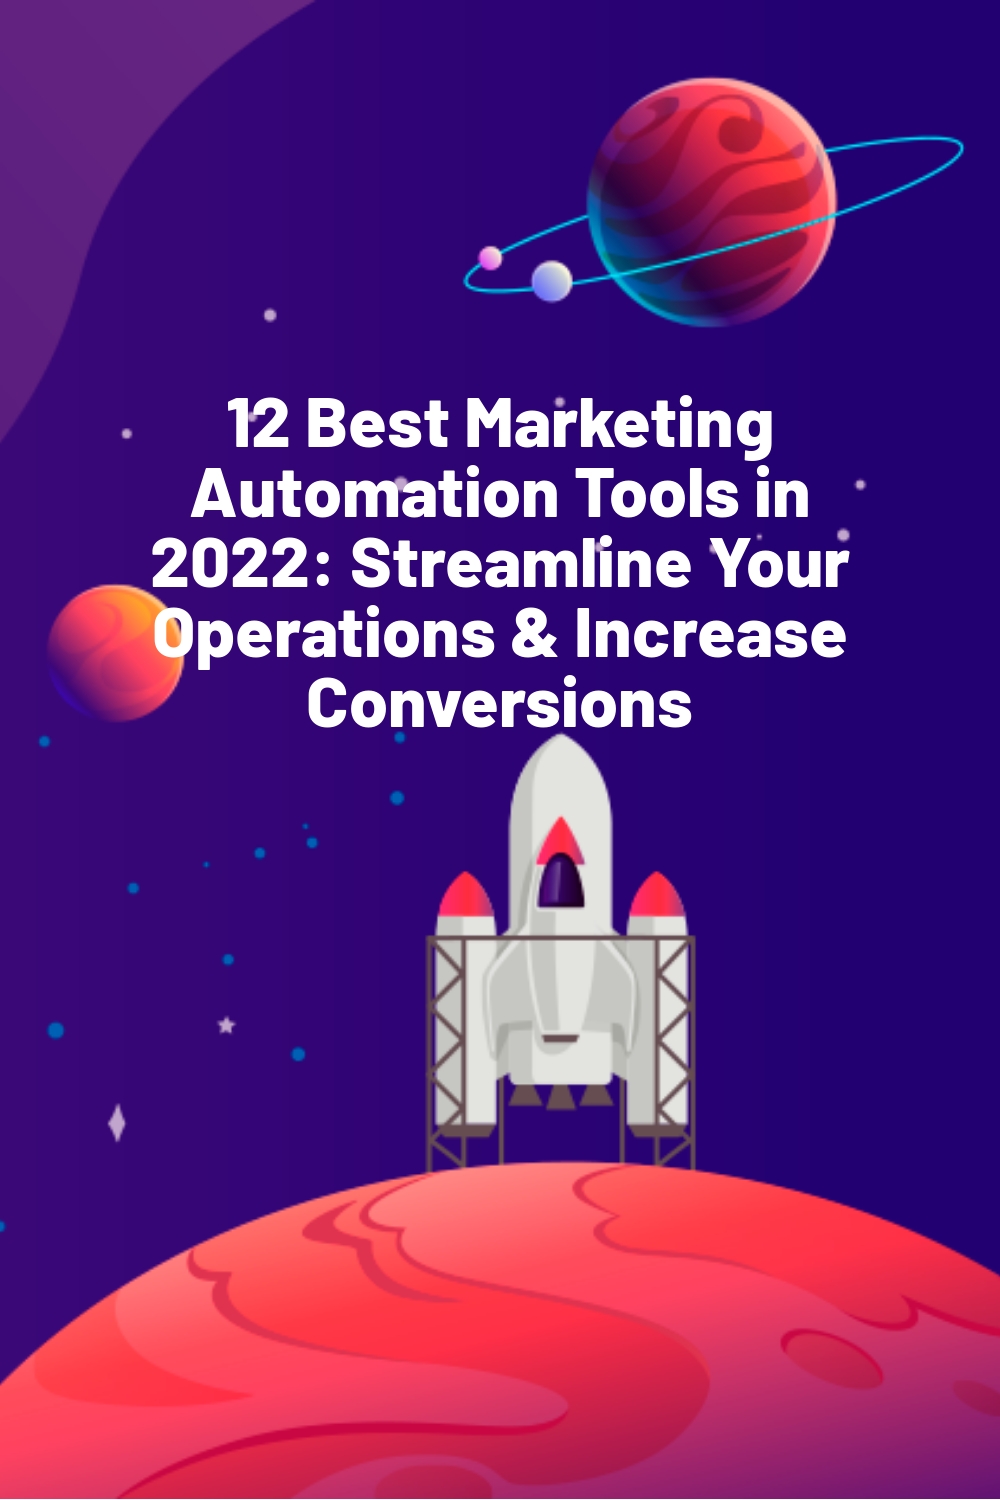 12 Best Marketing Automation Tools in 2022: Streamline Your Operations & Increase Conversions